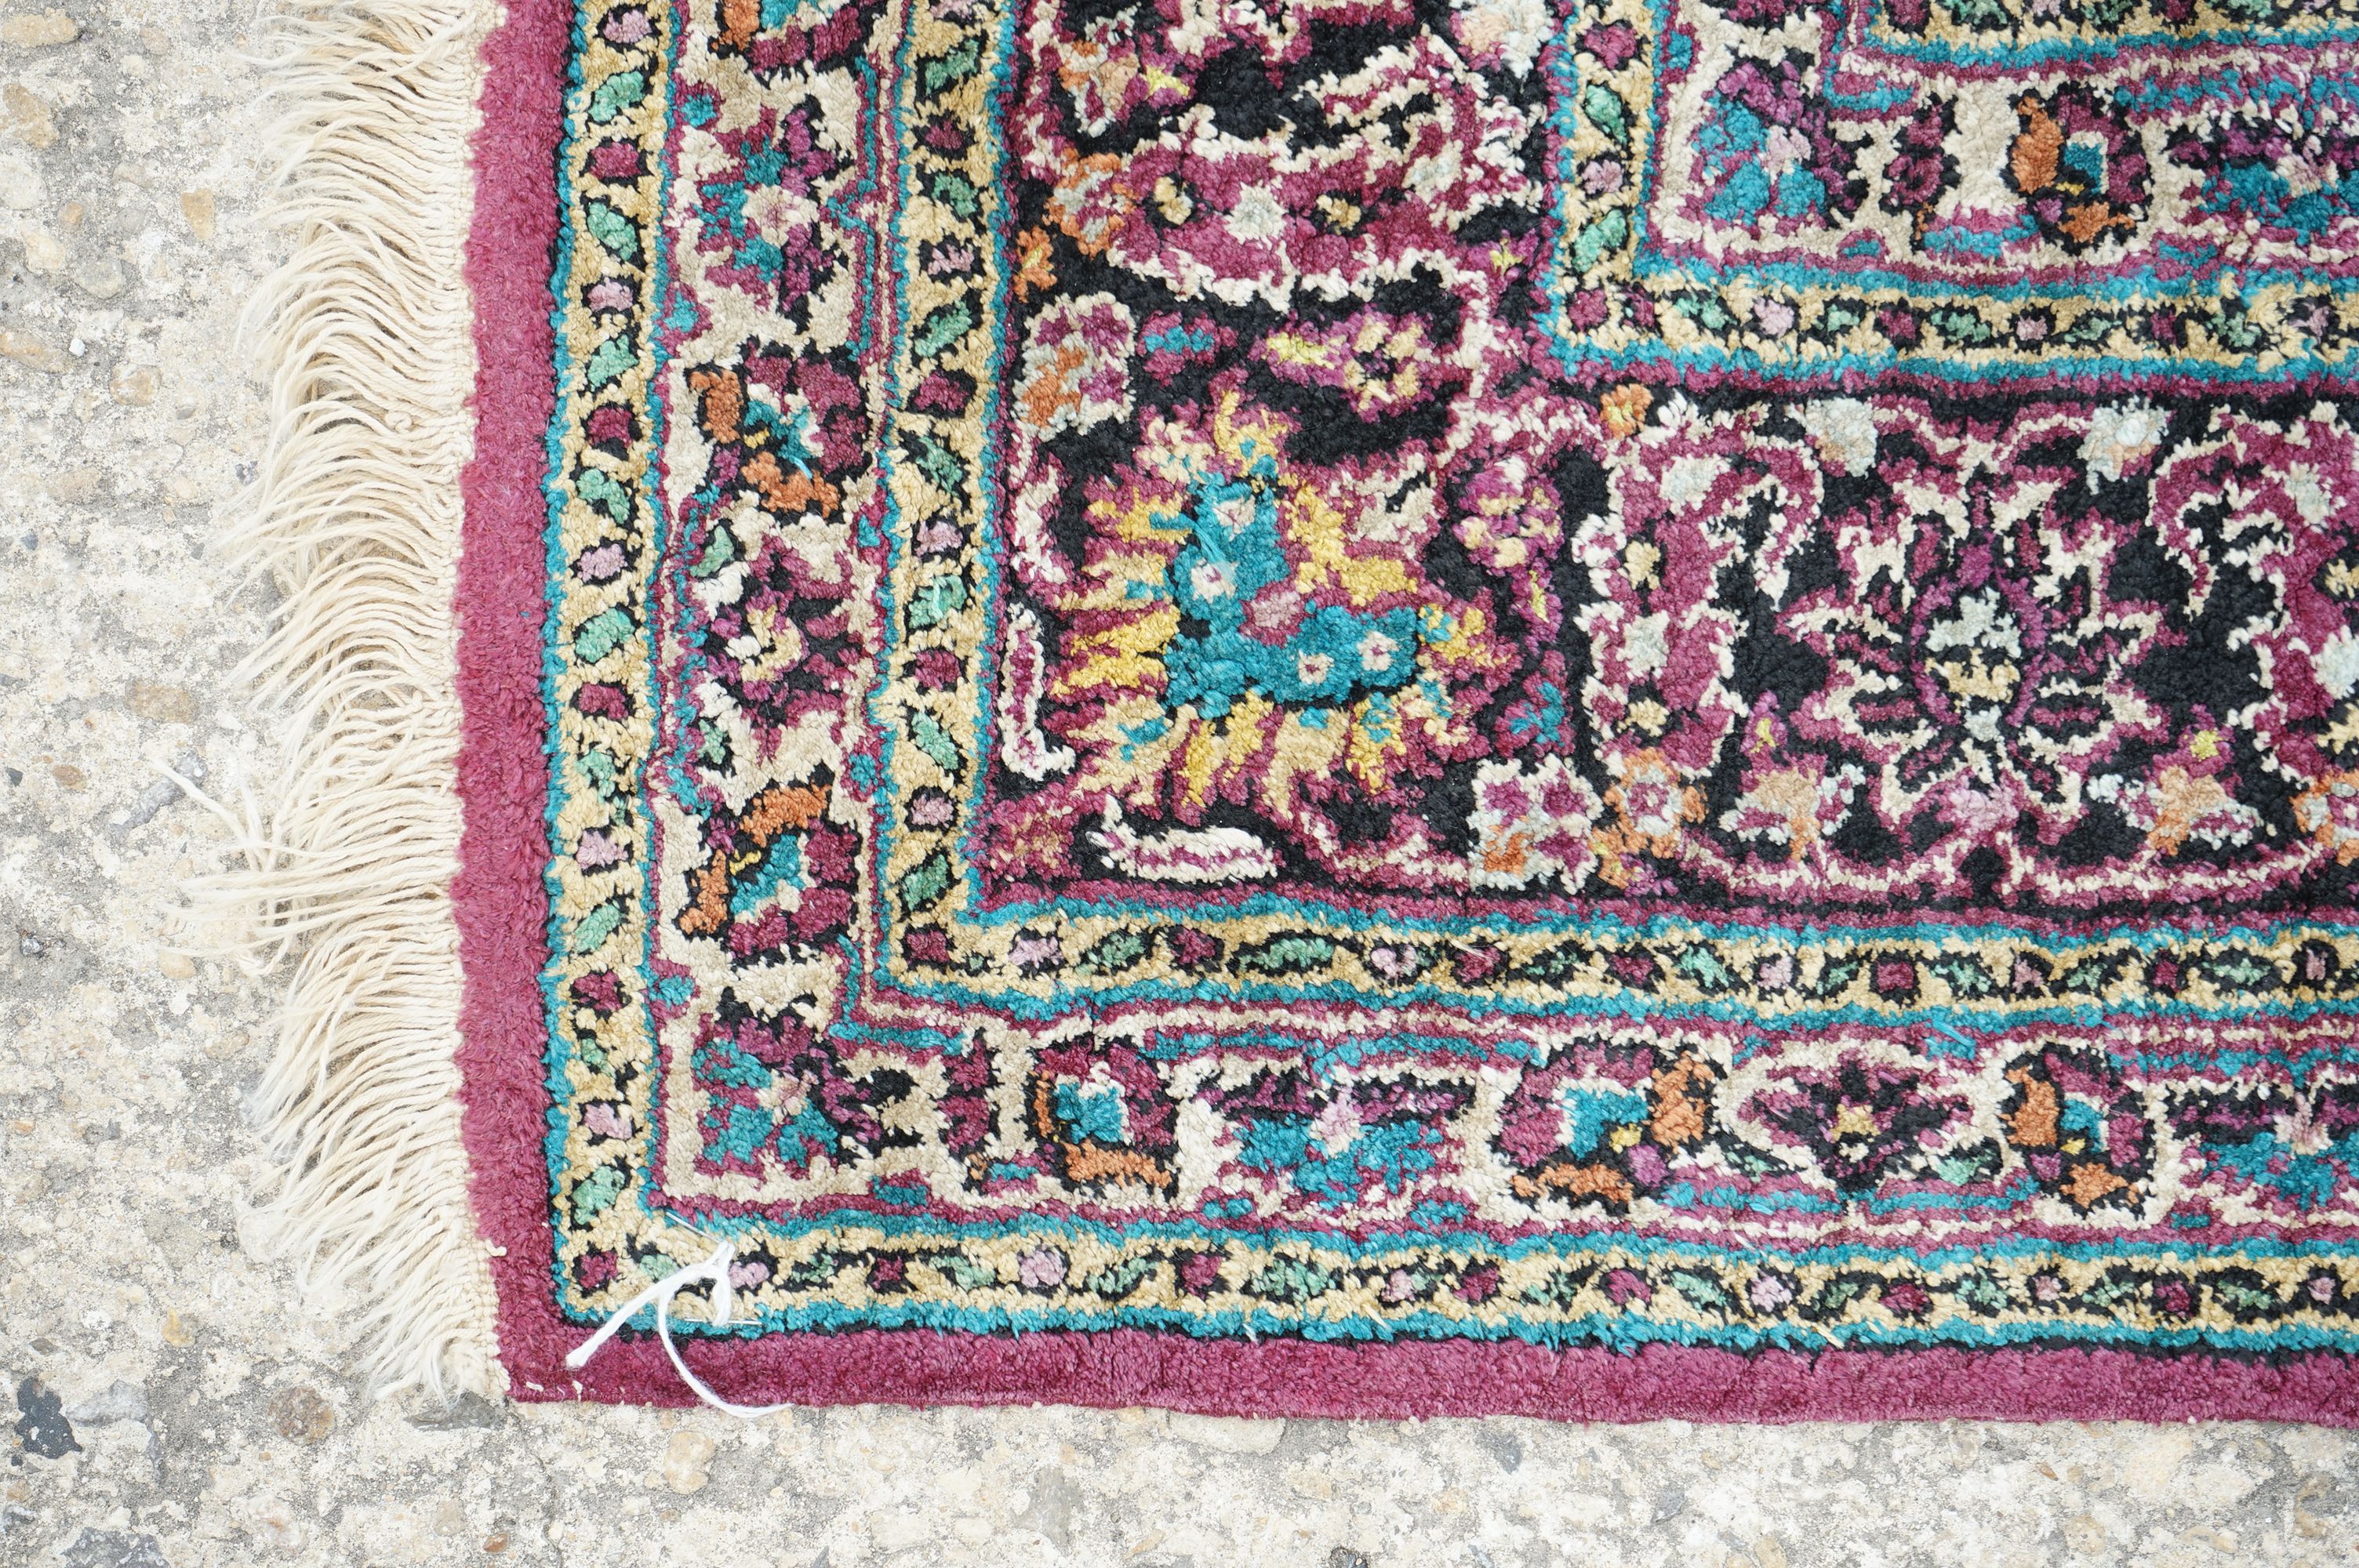 Indian Silk Kashmir Rug decorated with a central cartouche and a dense floral pattern within a - Image 7 of 8